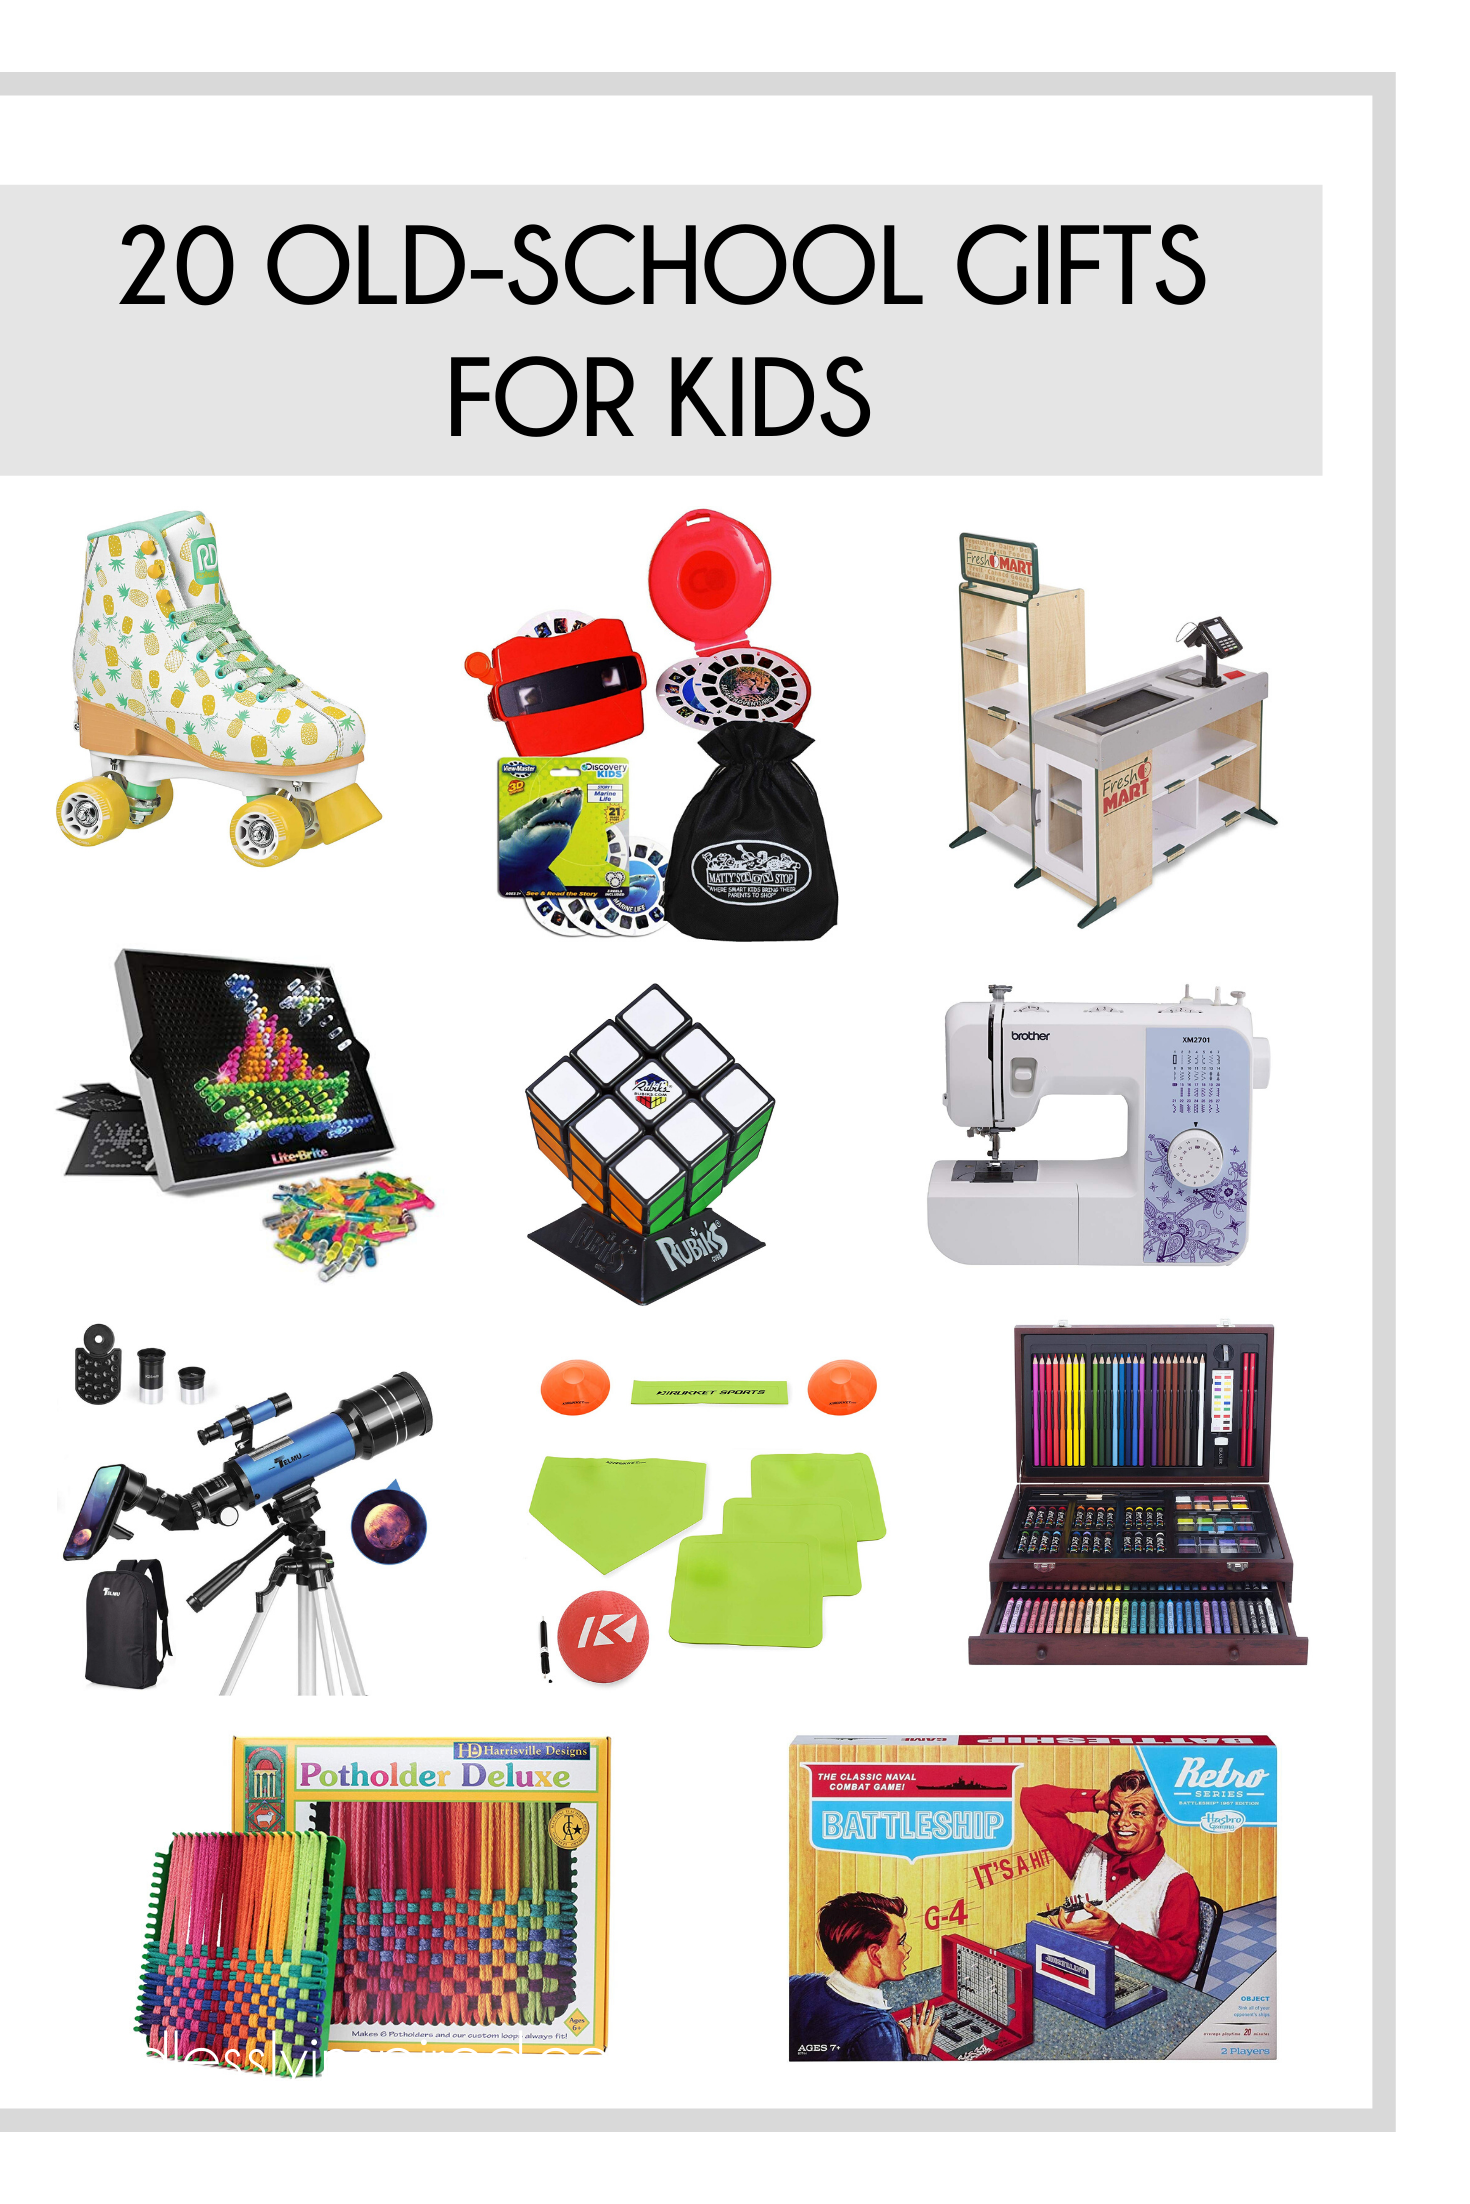 A collage of old-school gifts for kids